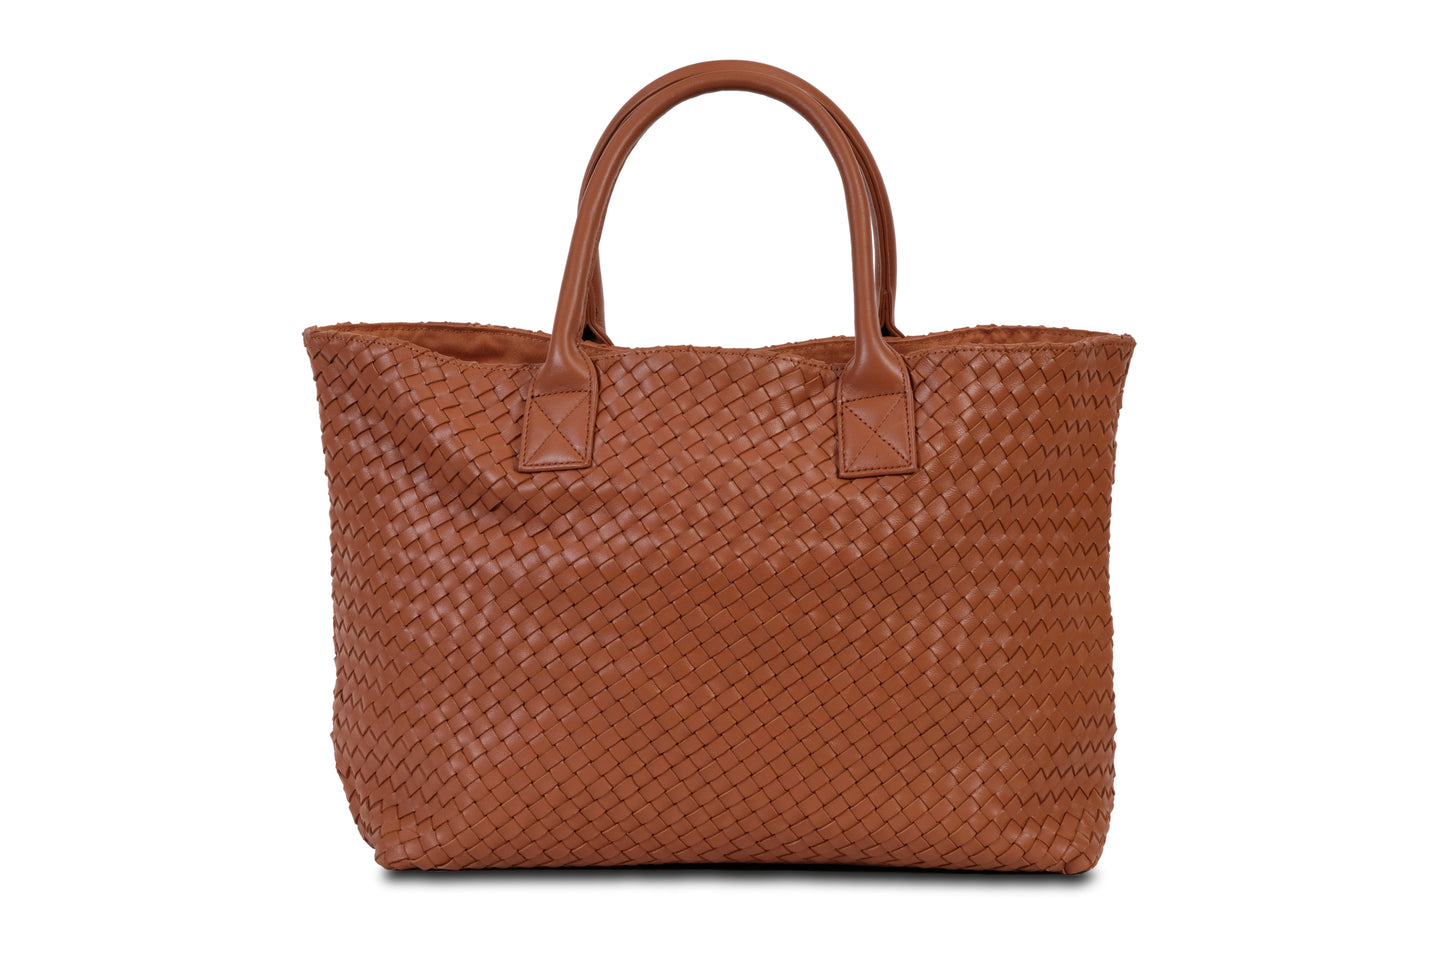 Destarina Coffee Brown Crosshatch Leather Tote Bag Handbag made by Dewi Maya front view available at the best boutique in Upstate South Carolina Spartanburg Greenville Dewi Maya Boutique